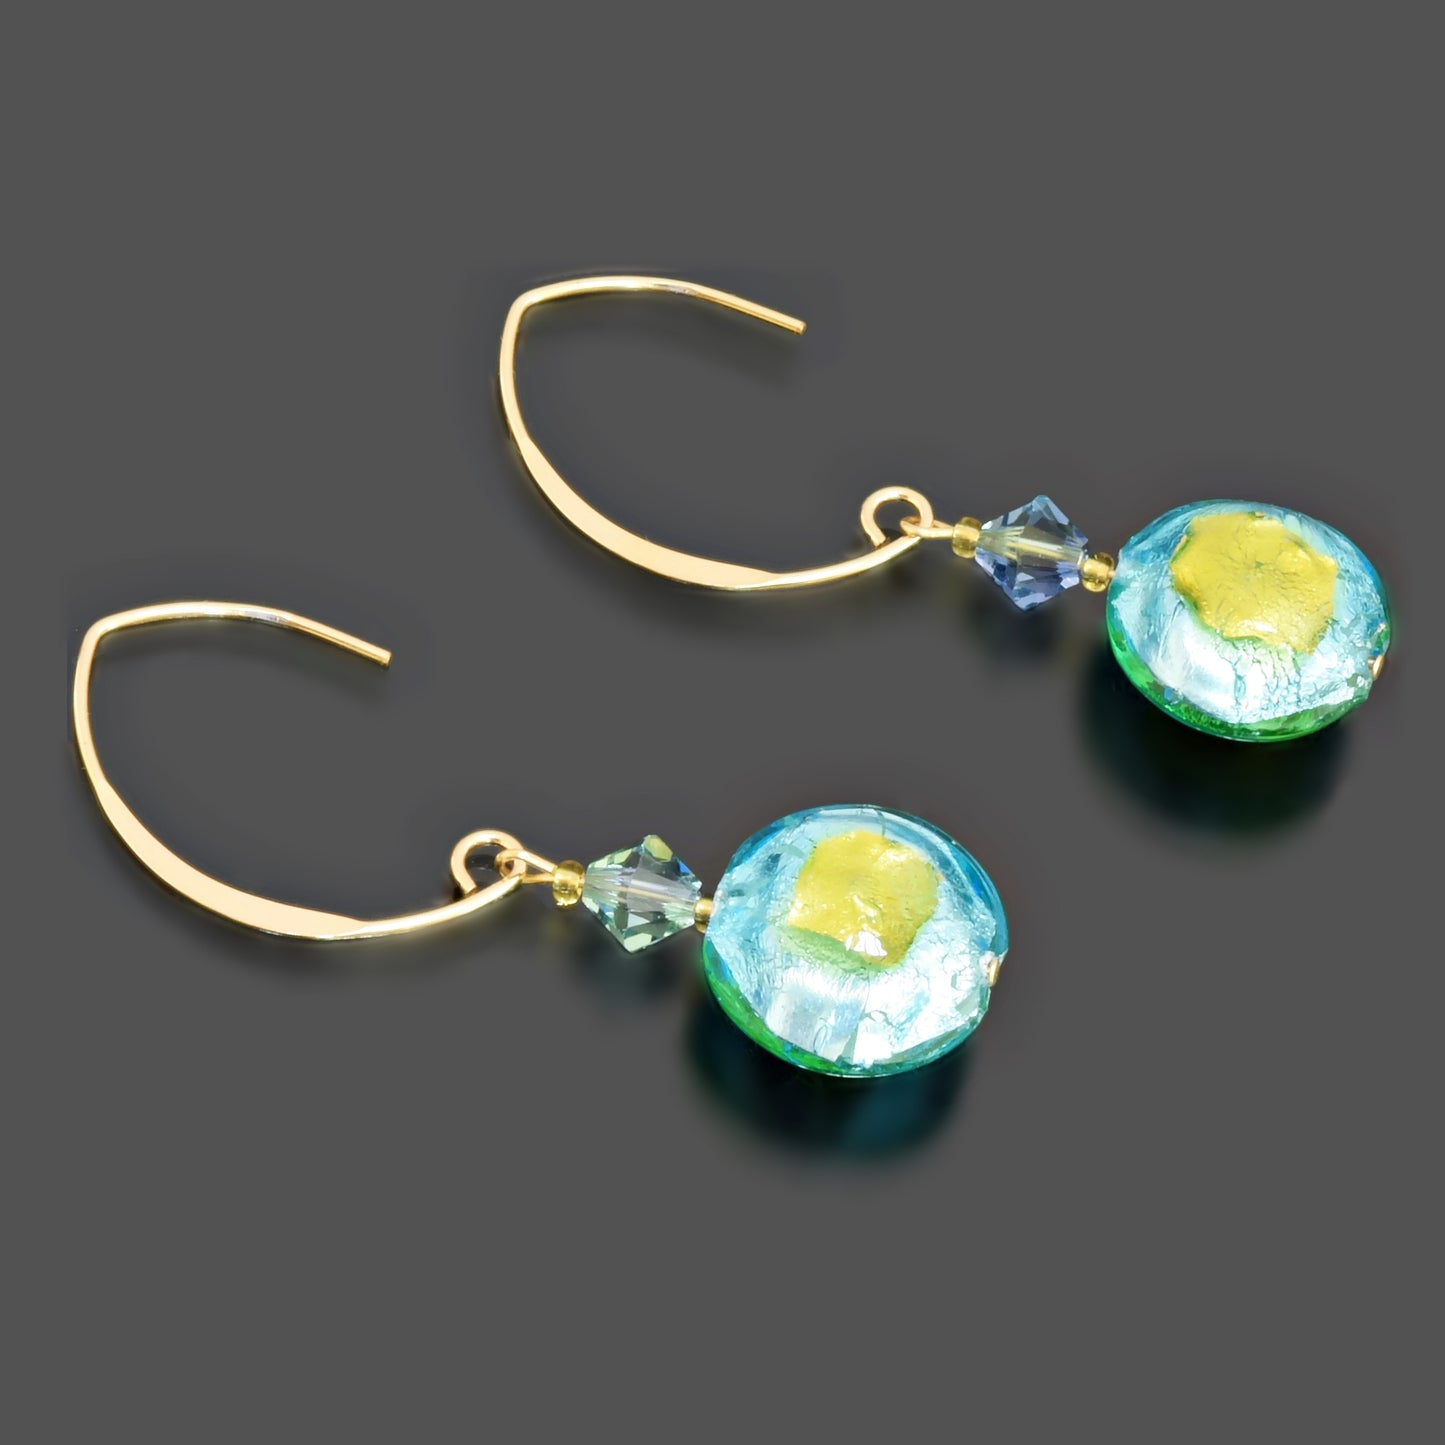 Gold-Filled Blue and Green Murano Glass Bead Earrings with Swarovski Crystals Gold Filled 